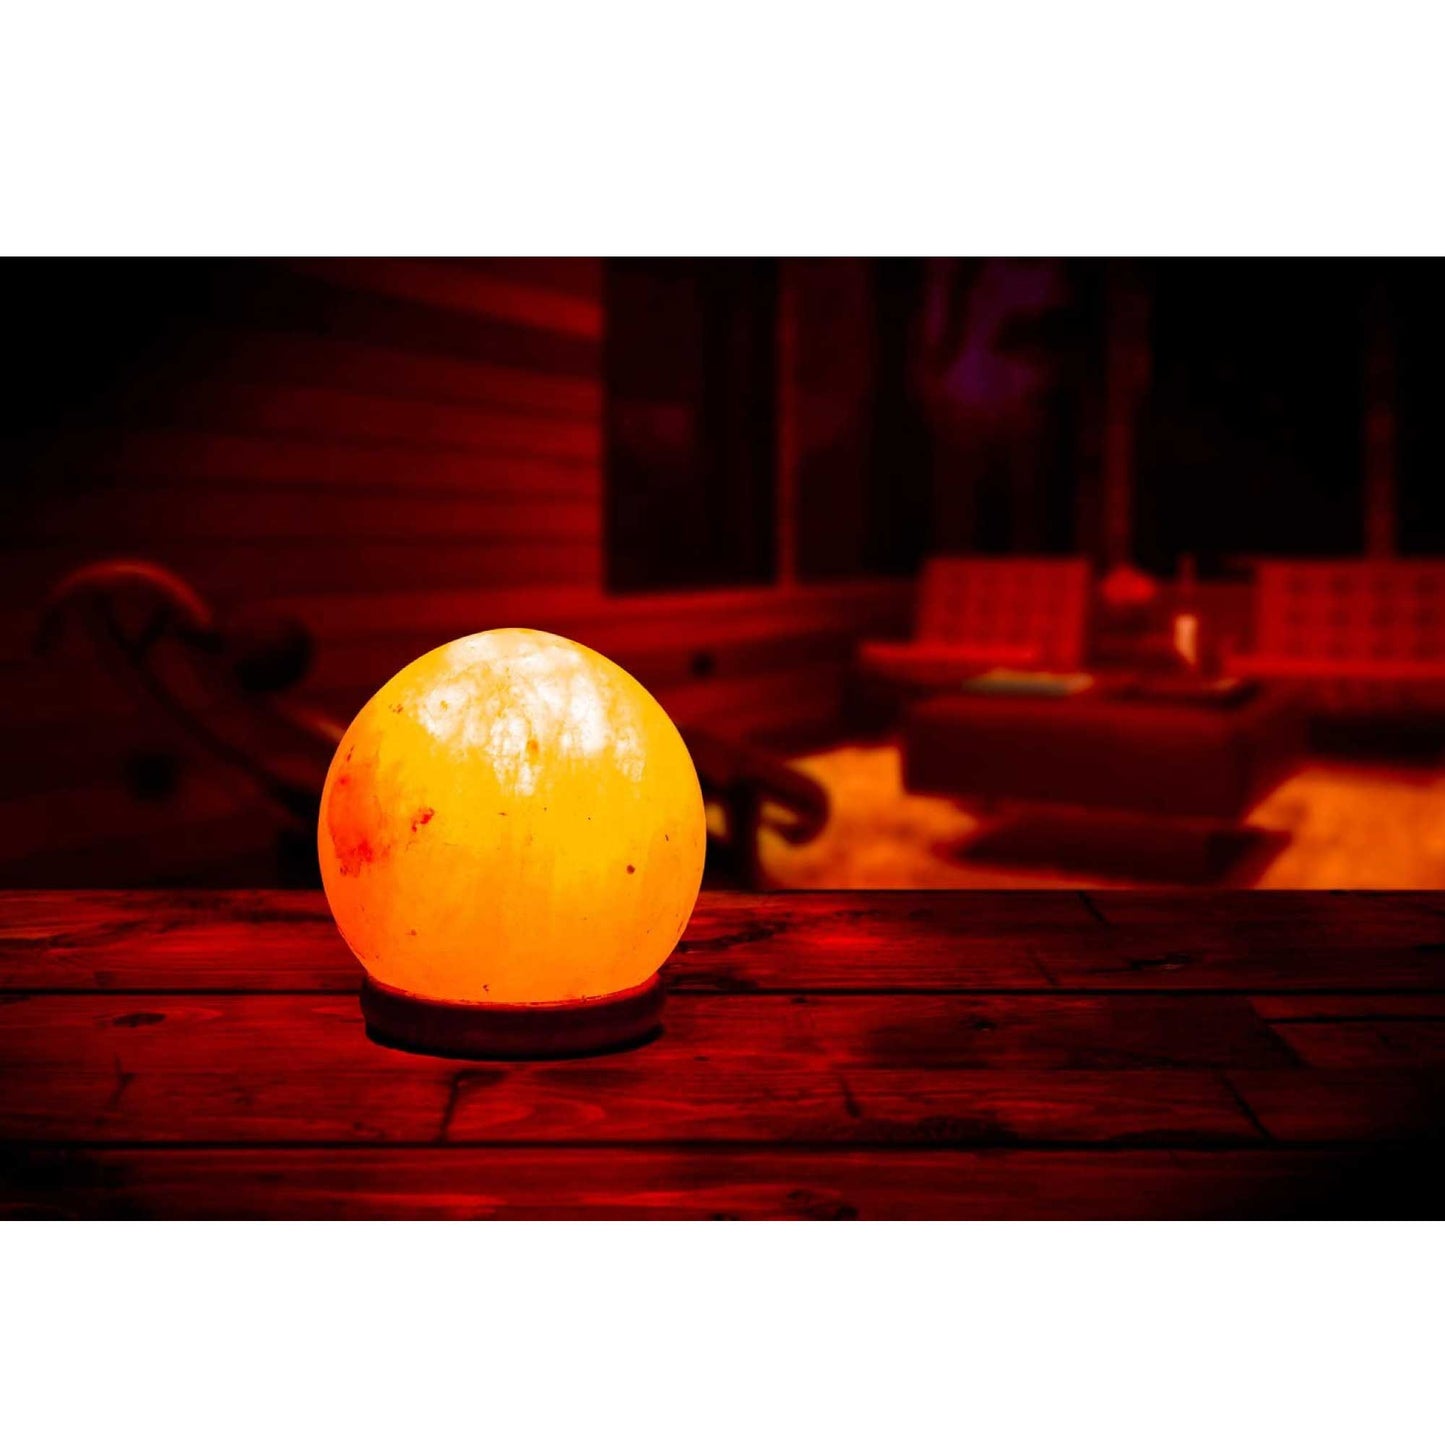 Himalayan Pink Salt Lamp - 5" Inches Ball Sphere Shape Carved Crystal Rock